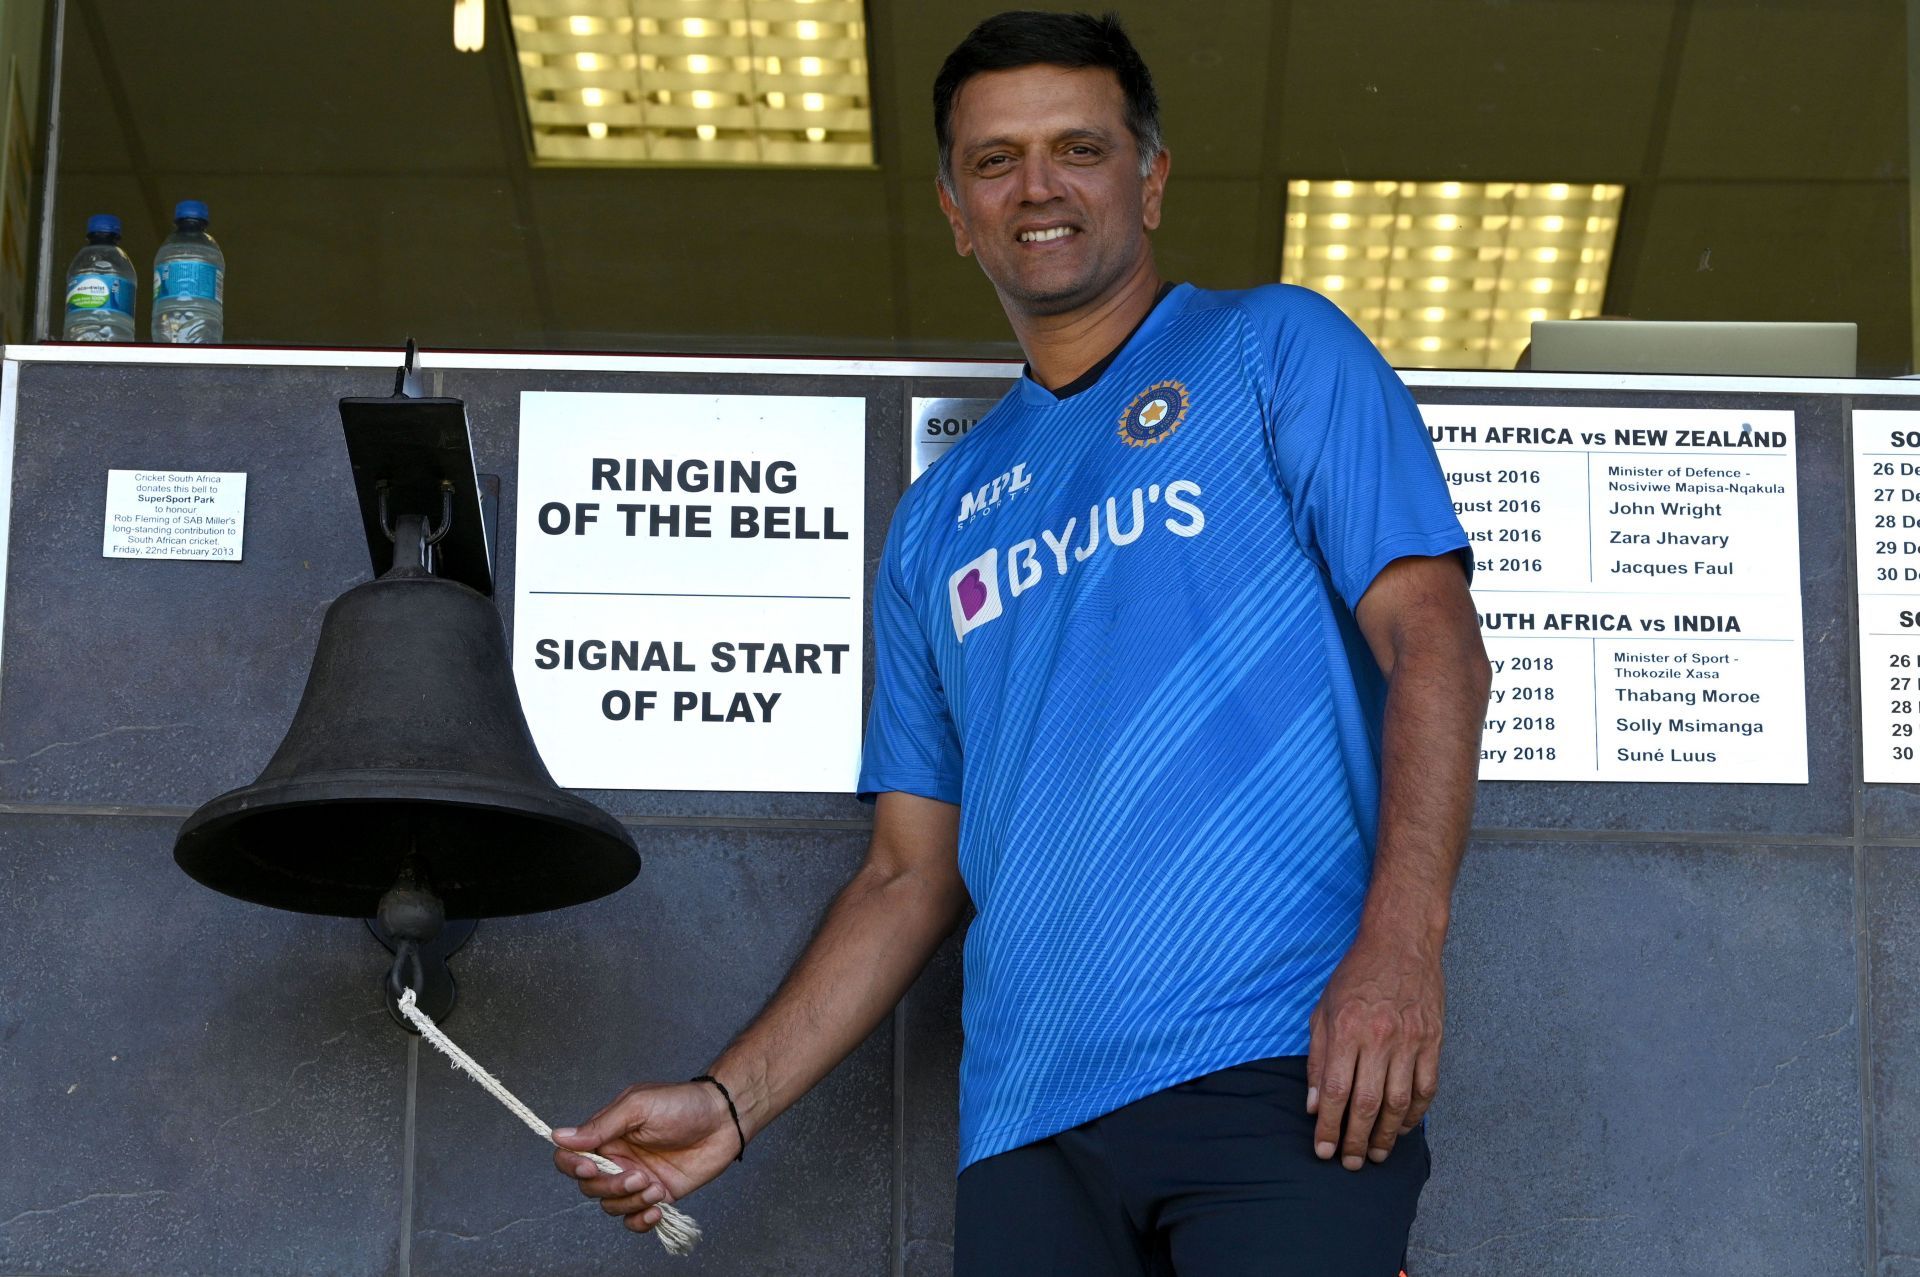 Coach Rahul Dravid has quite the task ahead of him to turn things around for the Indian team.